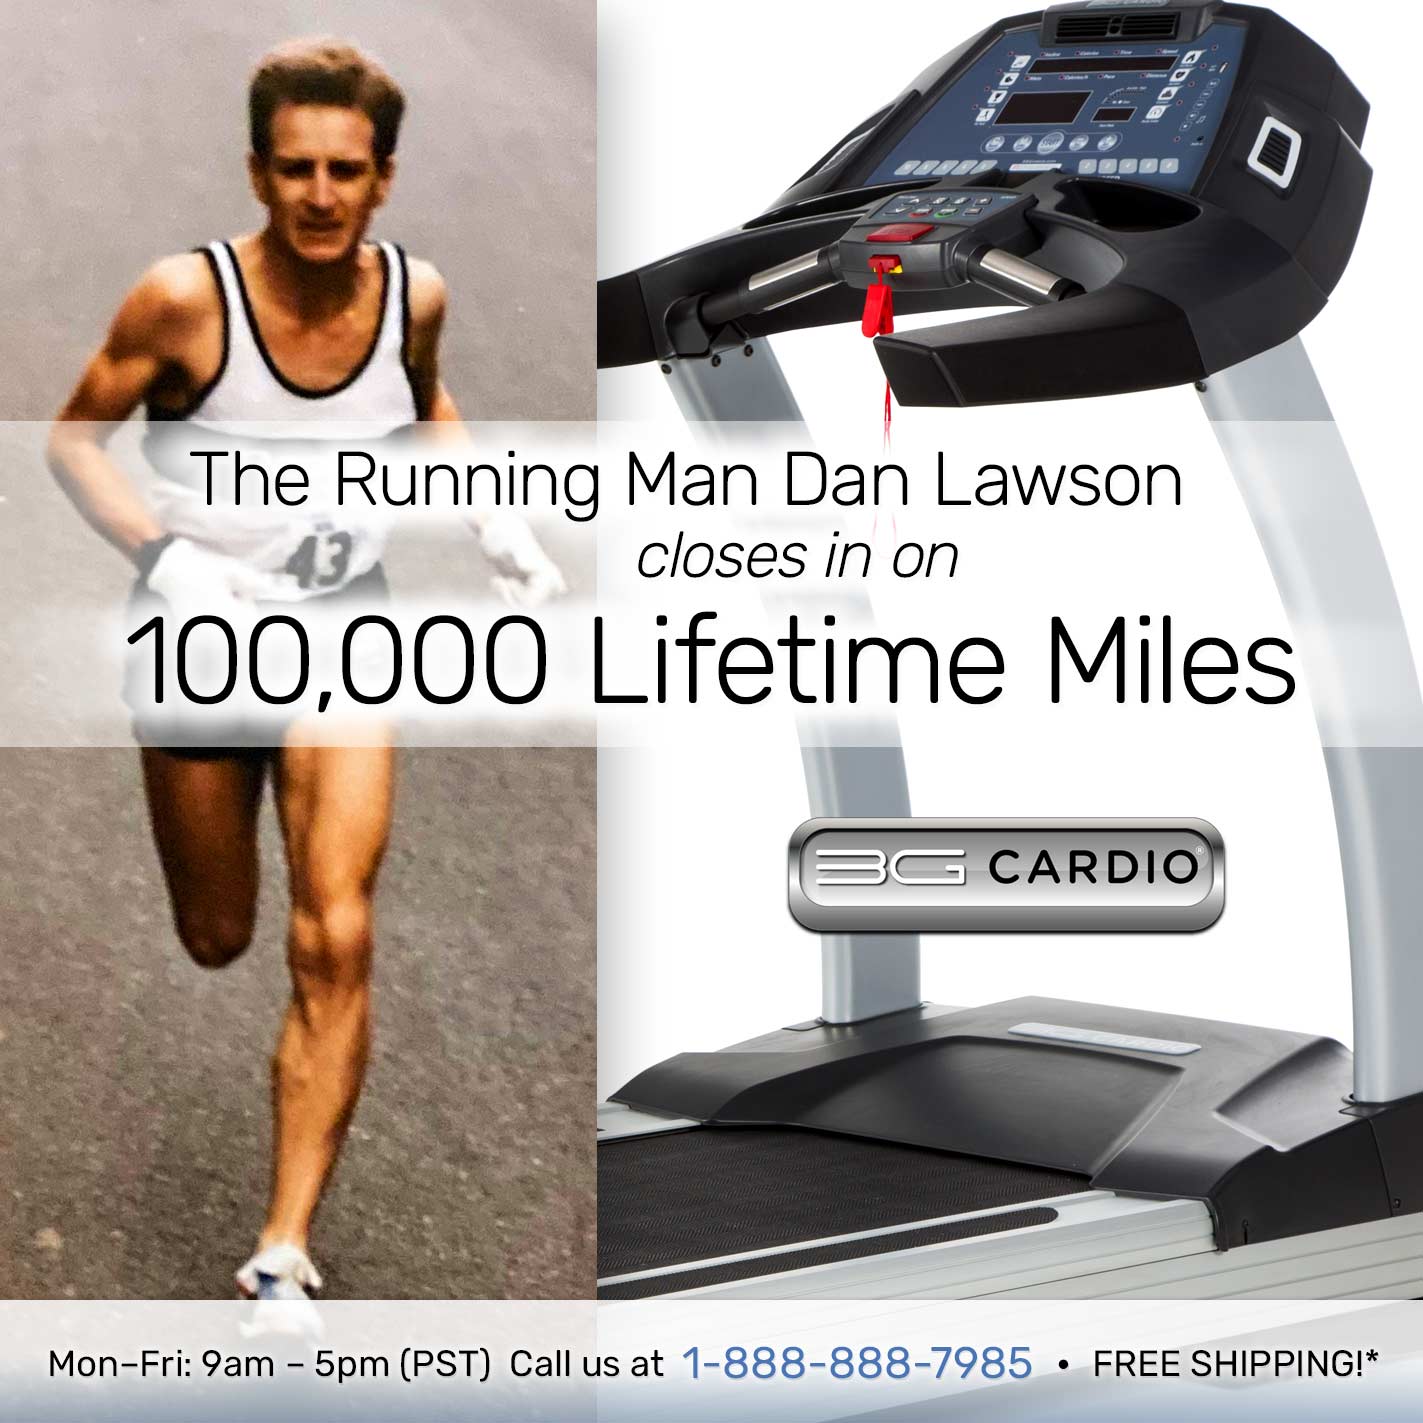 The Running Man Dan Lawson closes in on 100,000 Lifetime Miles